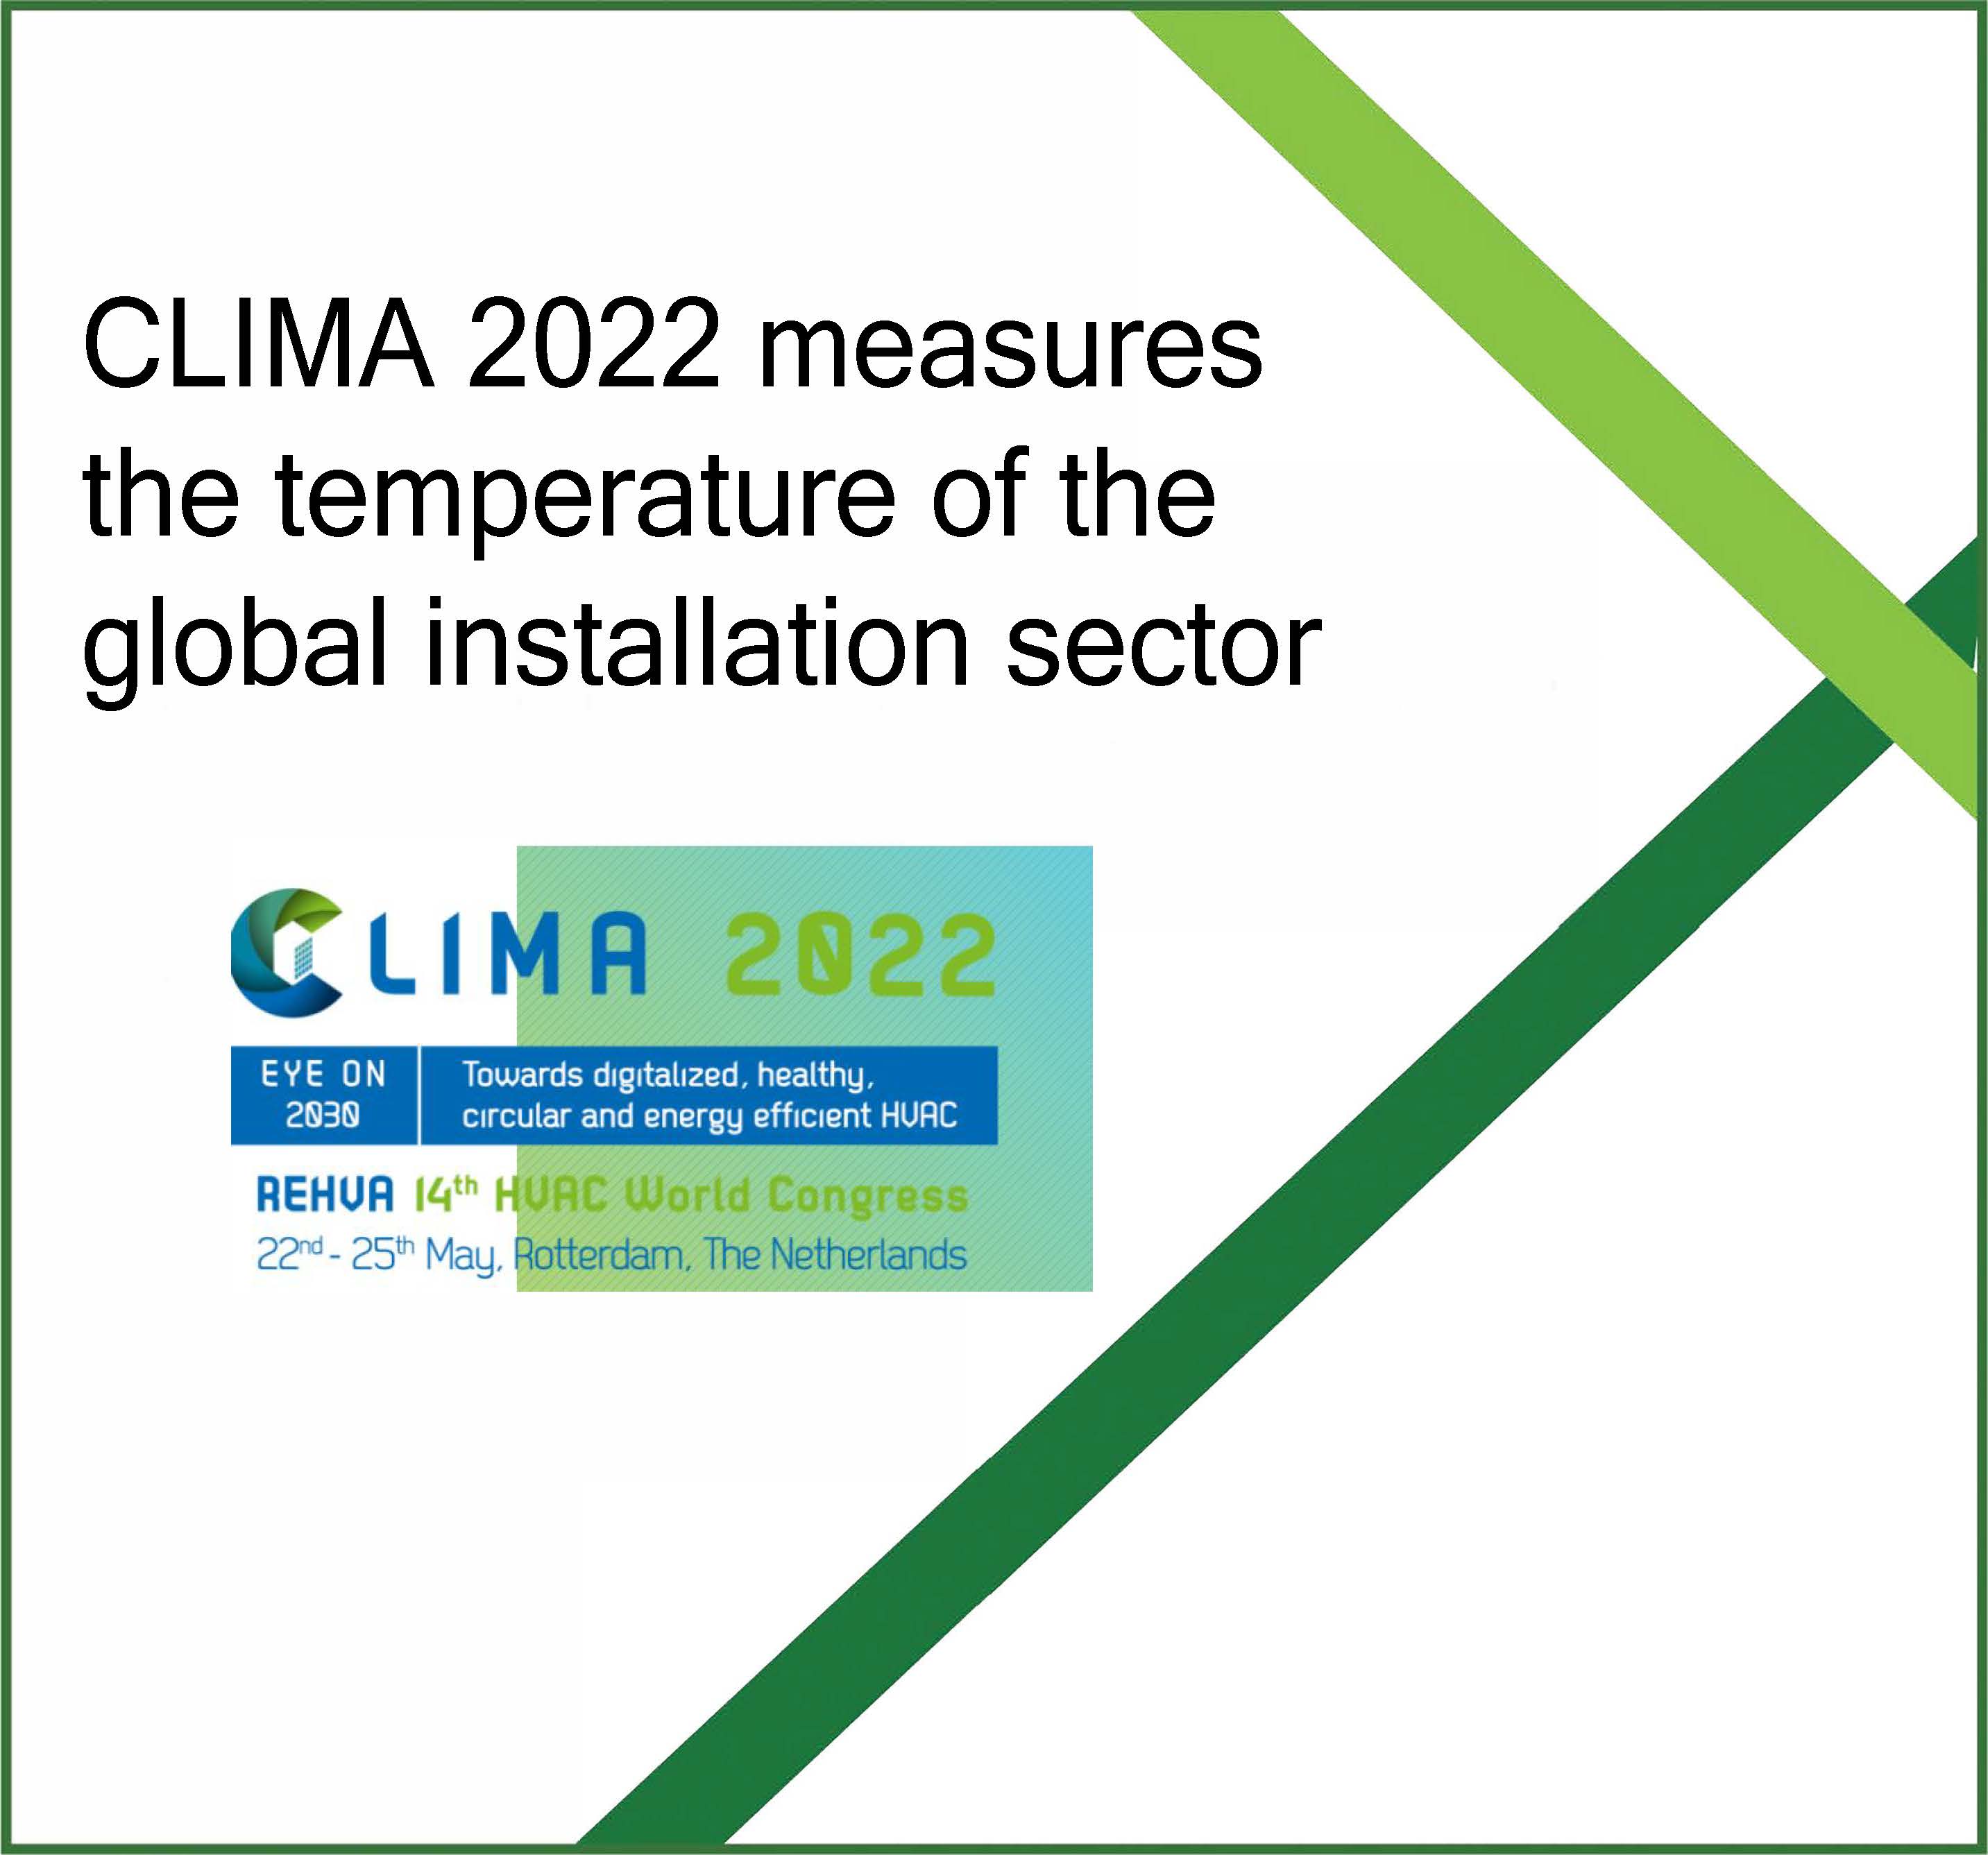 CLIMA 2022 measures the temperature of the global installation sector